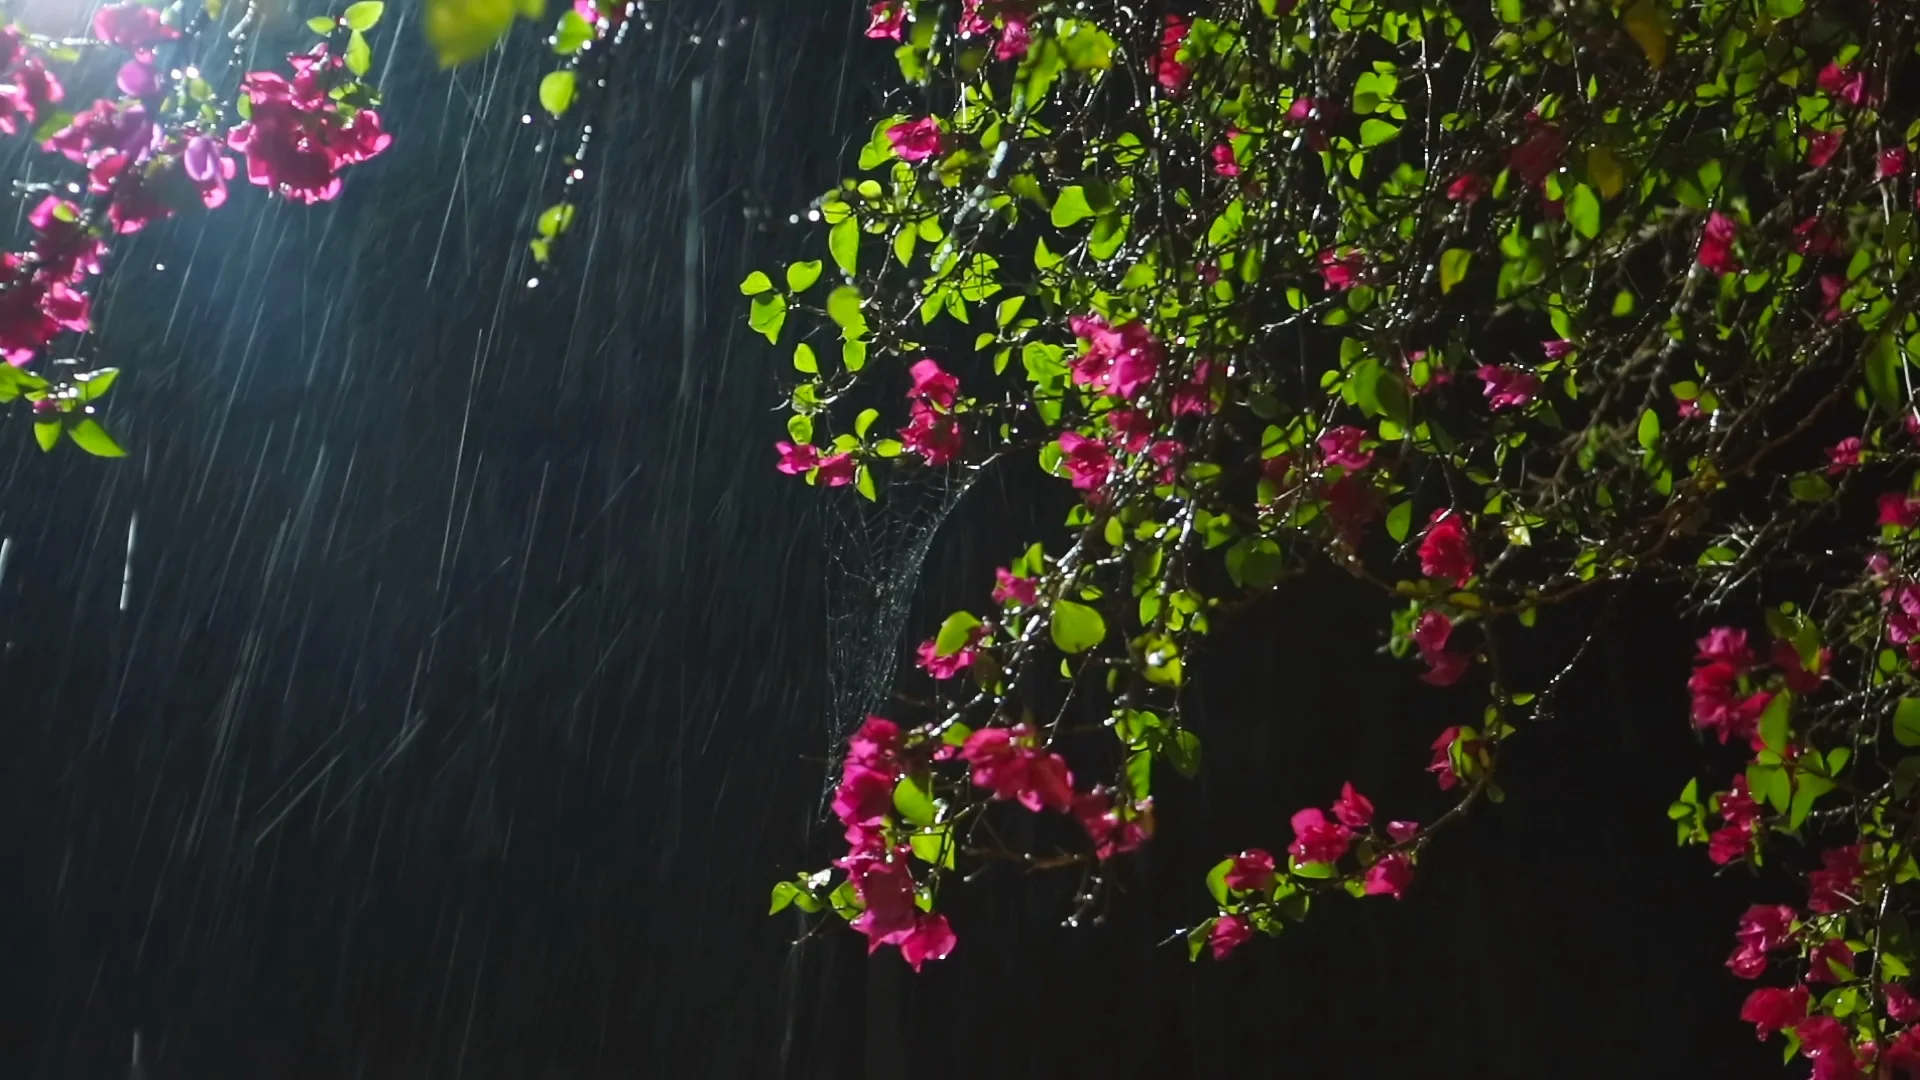 beautiful pictures of flowers in rain